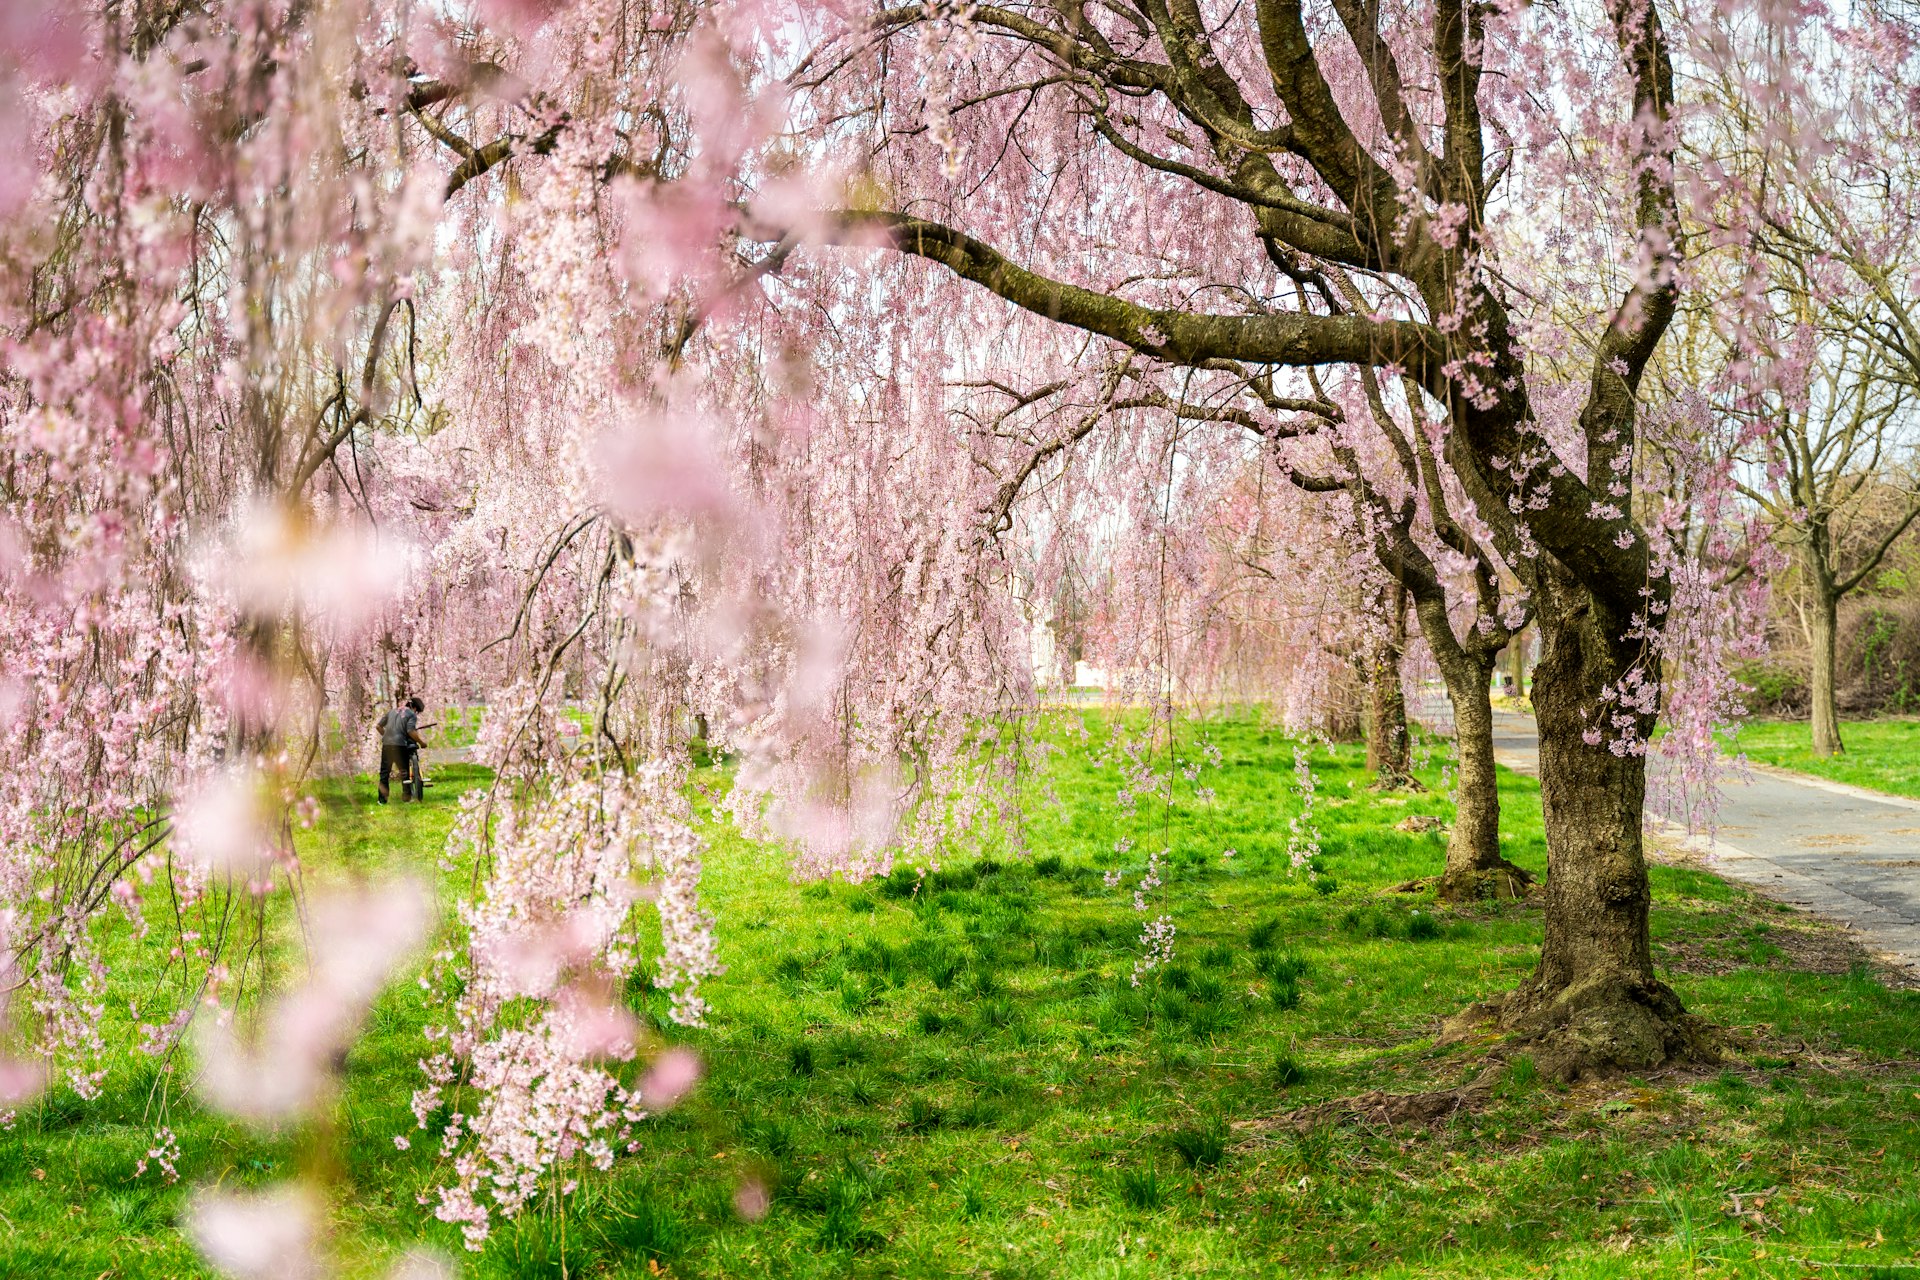 Pink cherry blossoms at Fairmount Park in Philadelphia during the spring.